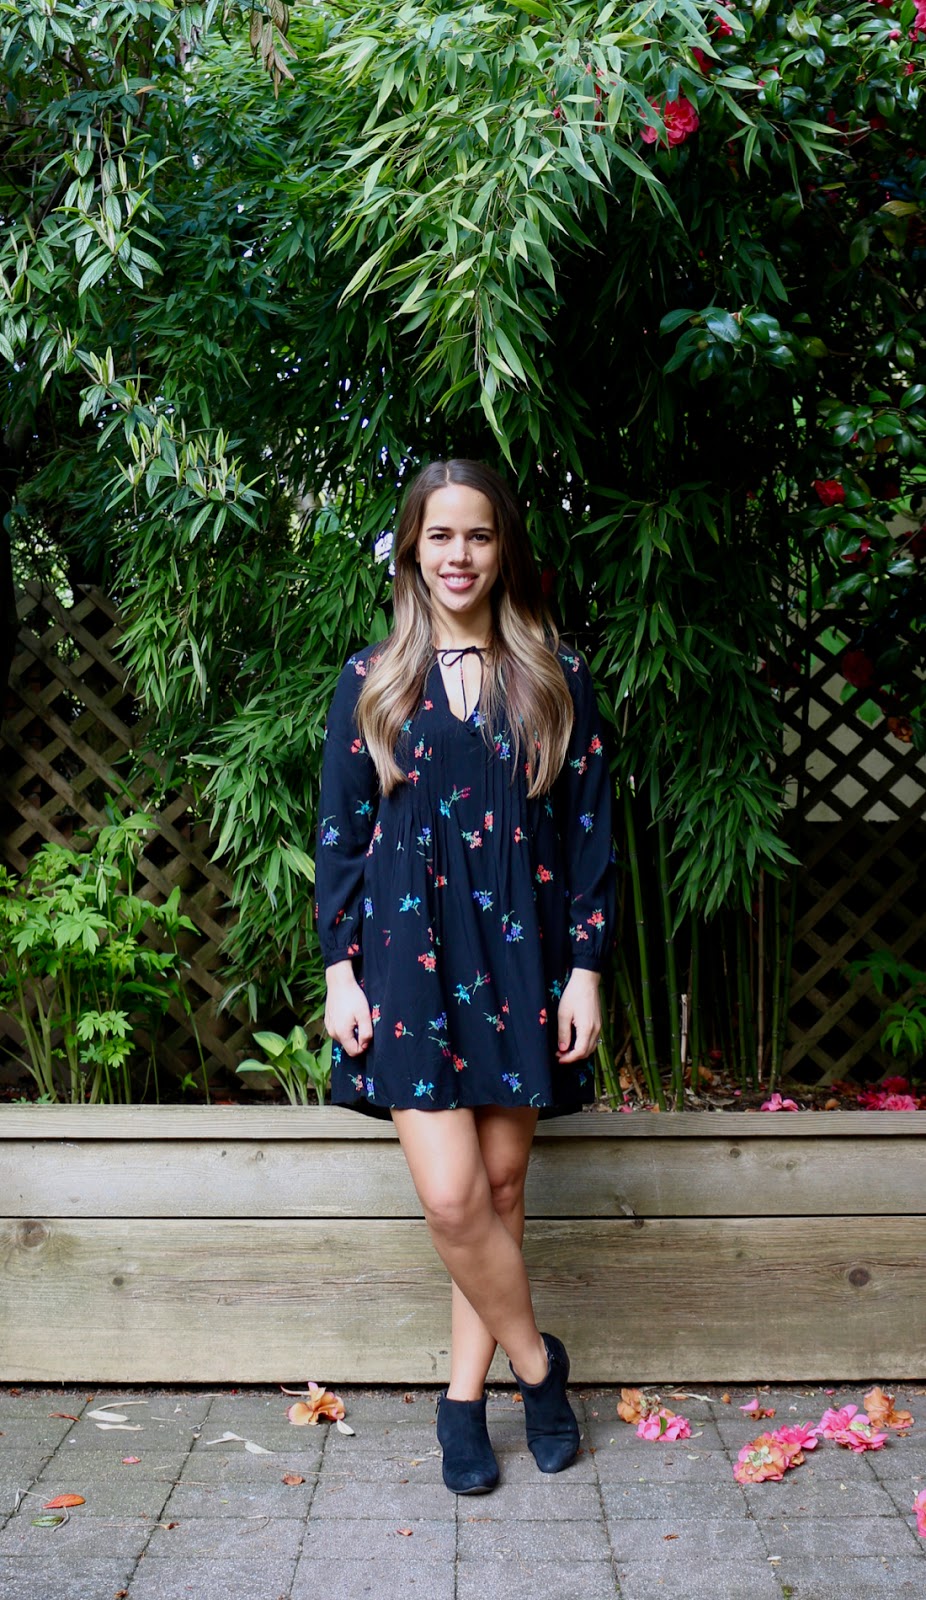 Jules in Flats - Floral Tie Neck Swing Dress with Ankle Boots (Business Casual Spring Workwear on a Budget)